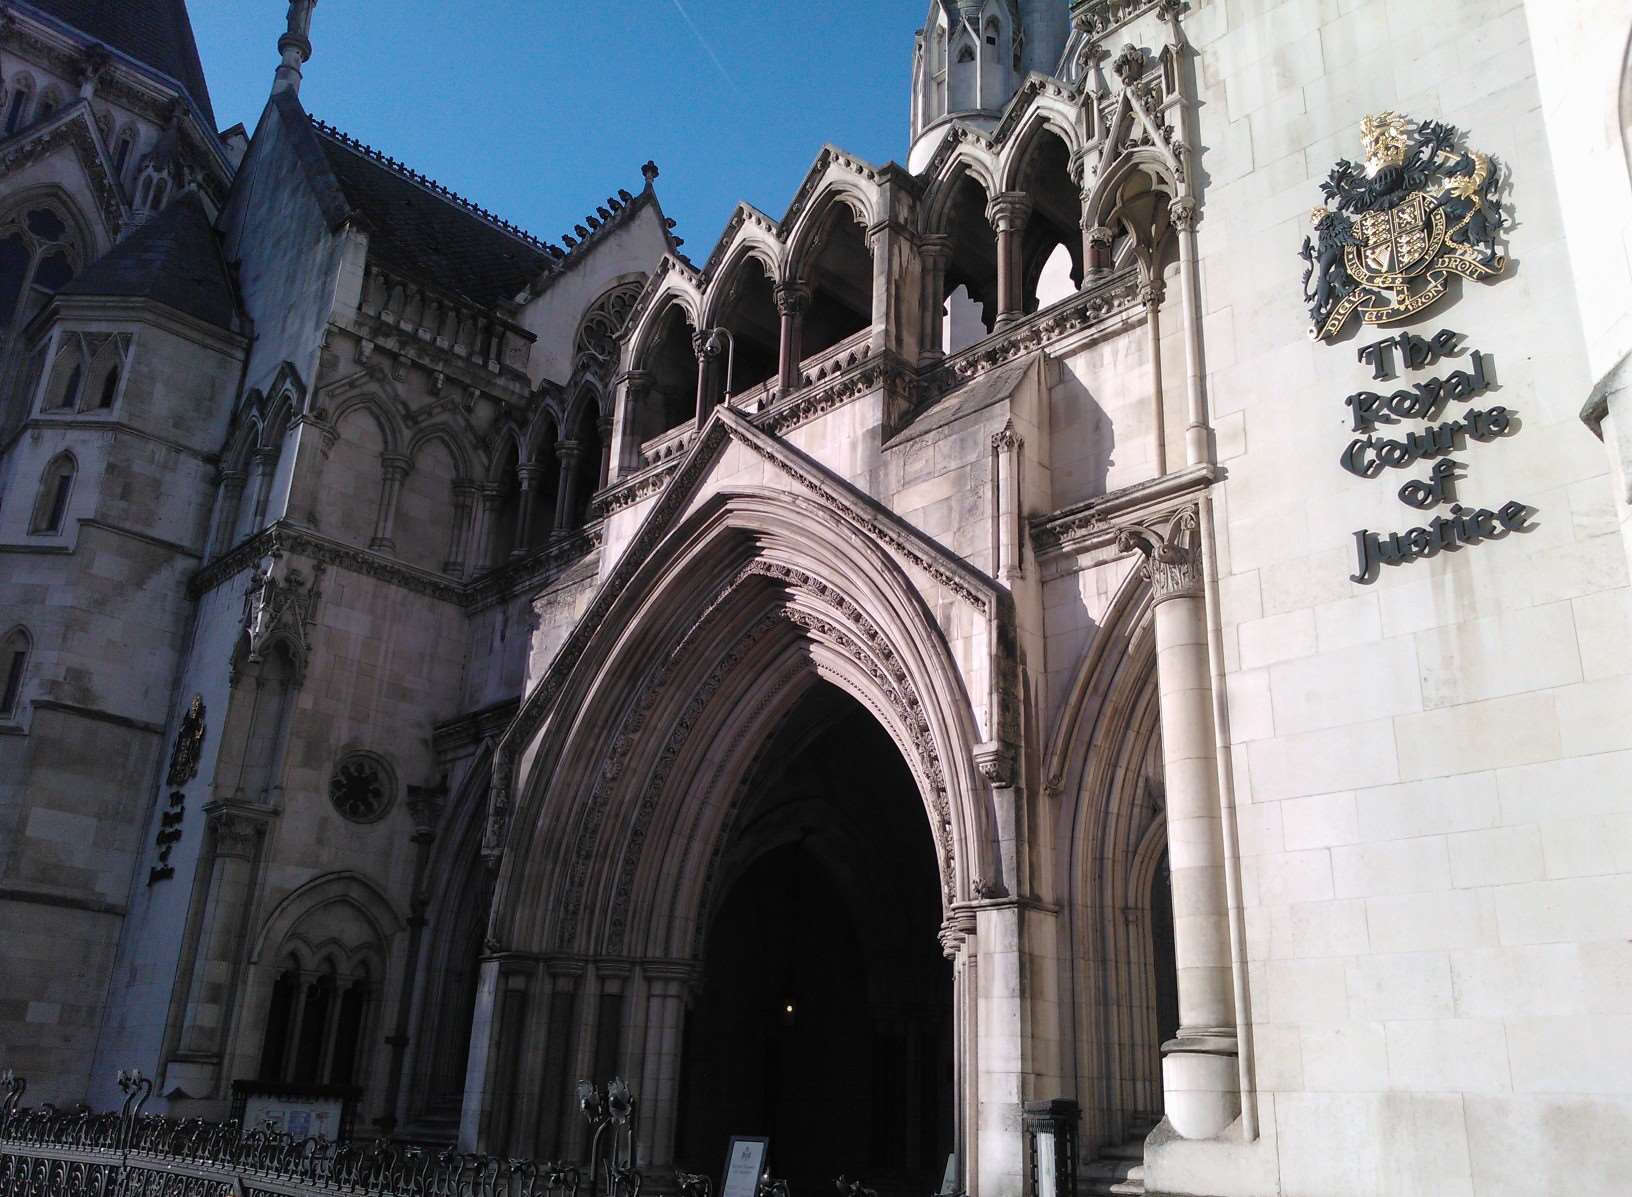 The Royal Courts of Justice, where appeal court hearings are held